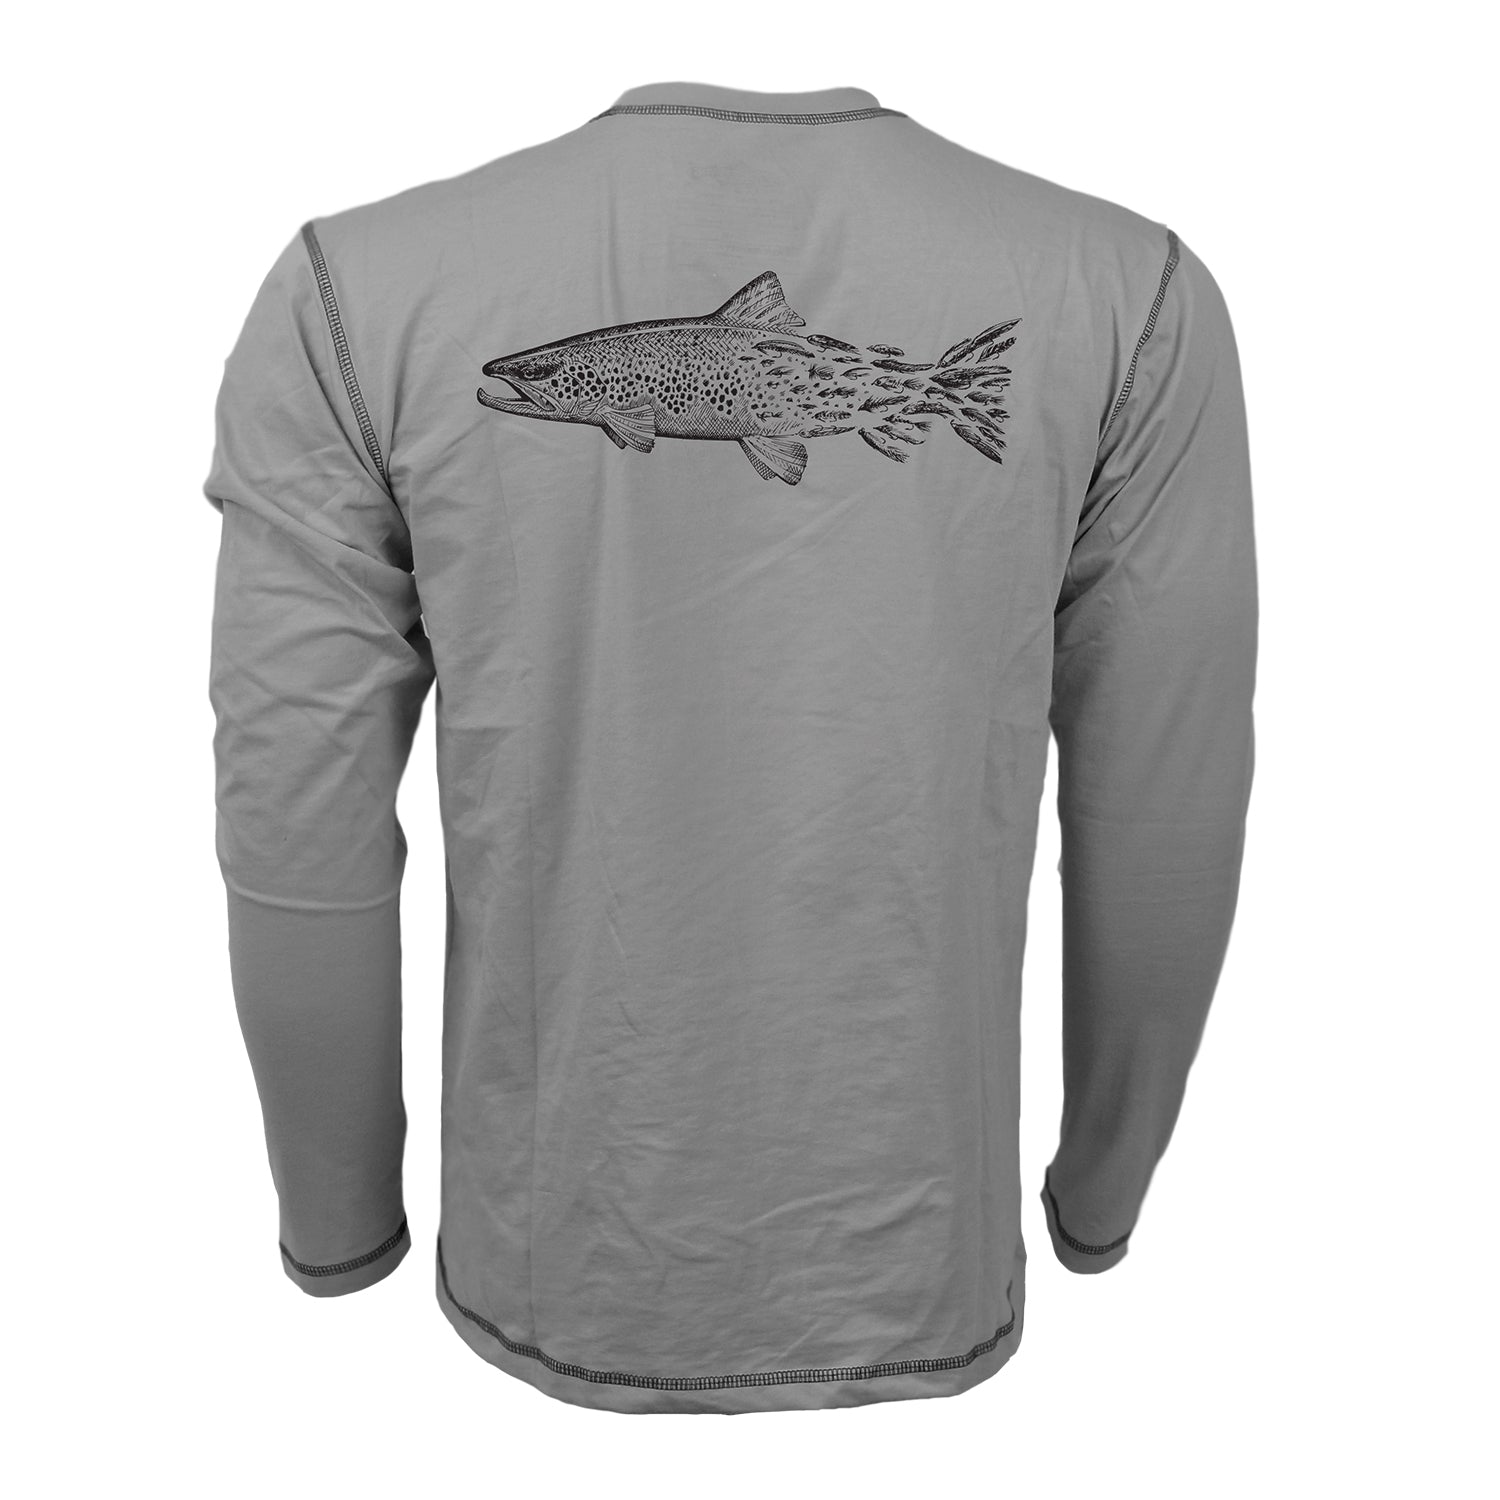 backside of gray long sleeve sunshirt with a brown trout transitioning into fishing flies towards the tail in black